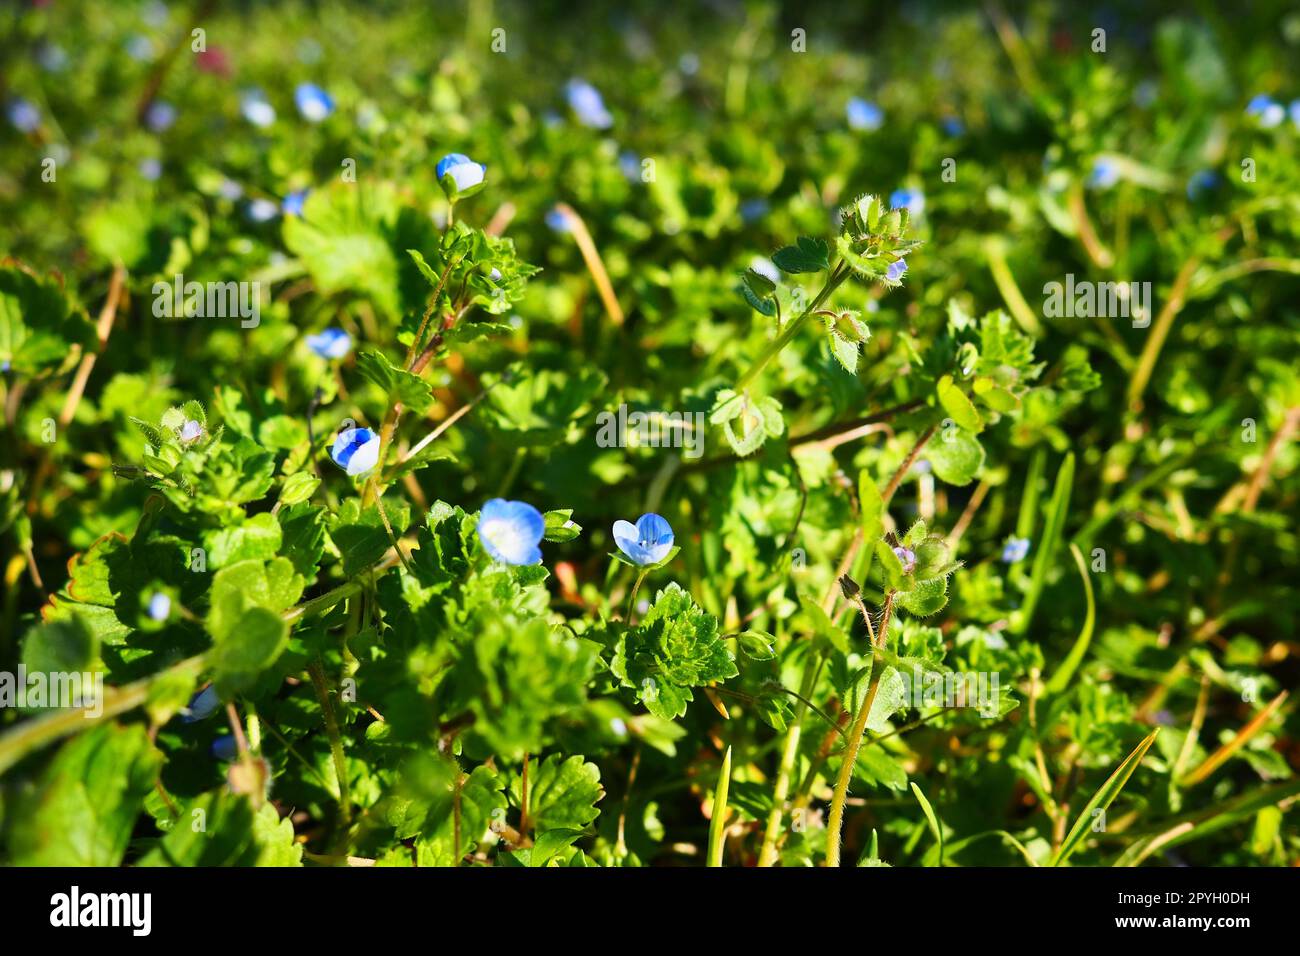 Forget-me-not flower with bright green leaves.Blue flowers on a green background. Blooming flowers nature background. Scorpion grasses. Myosotis scorpioides. Forget-me-nots are a popular bridal flower Stock Photo